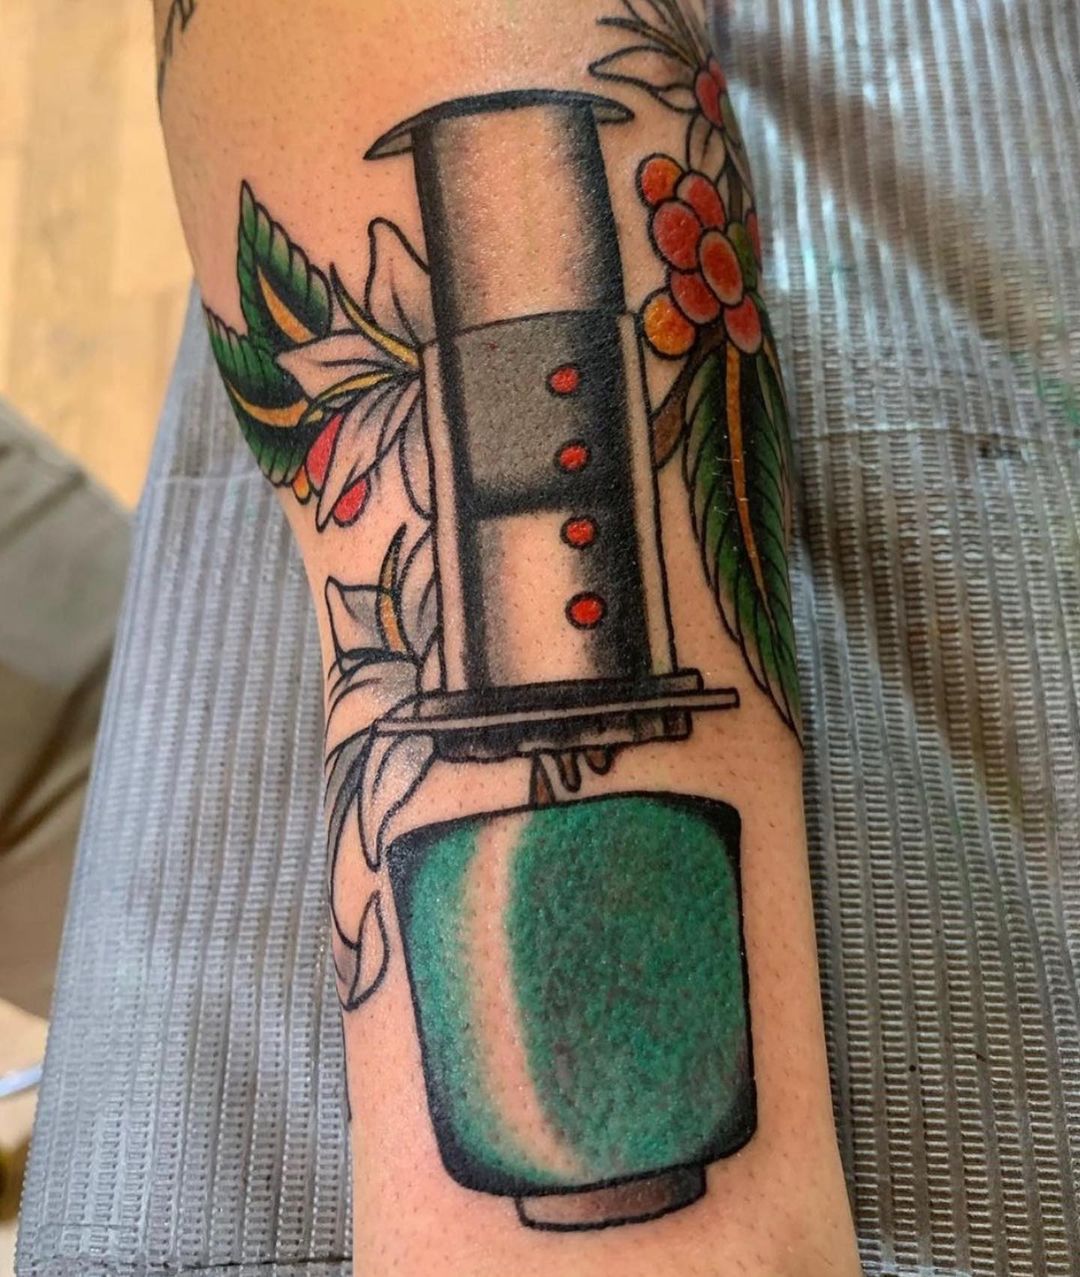 AeroPress tattoo with green cup and flowers